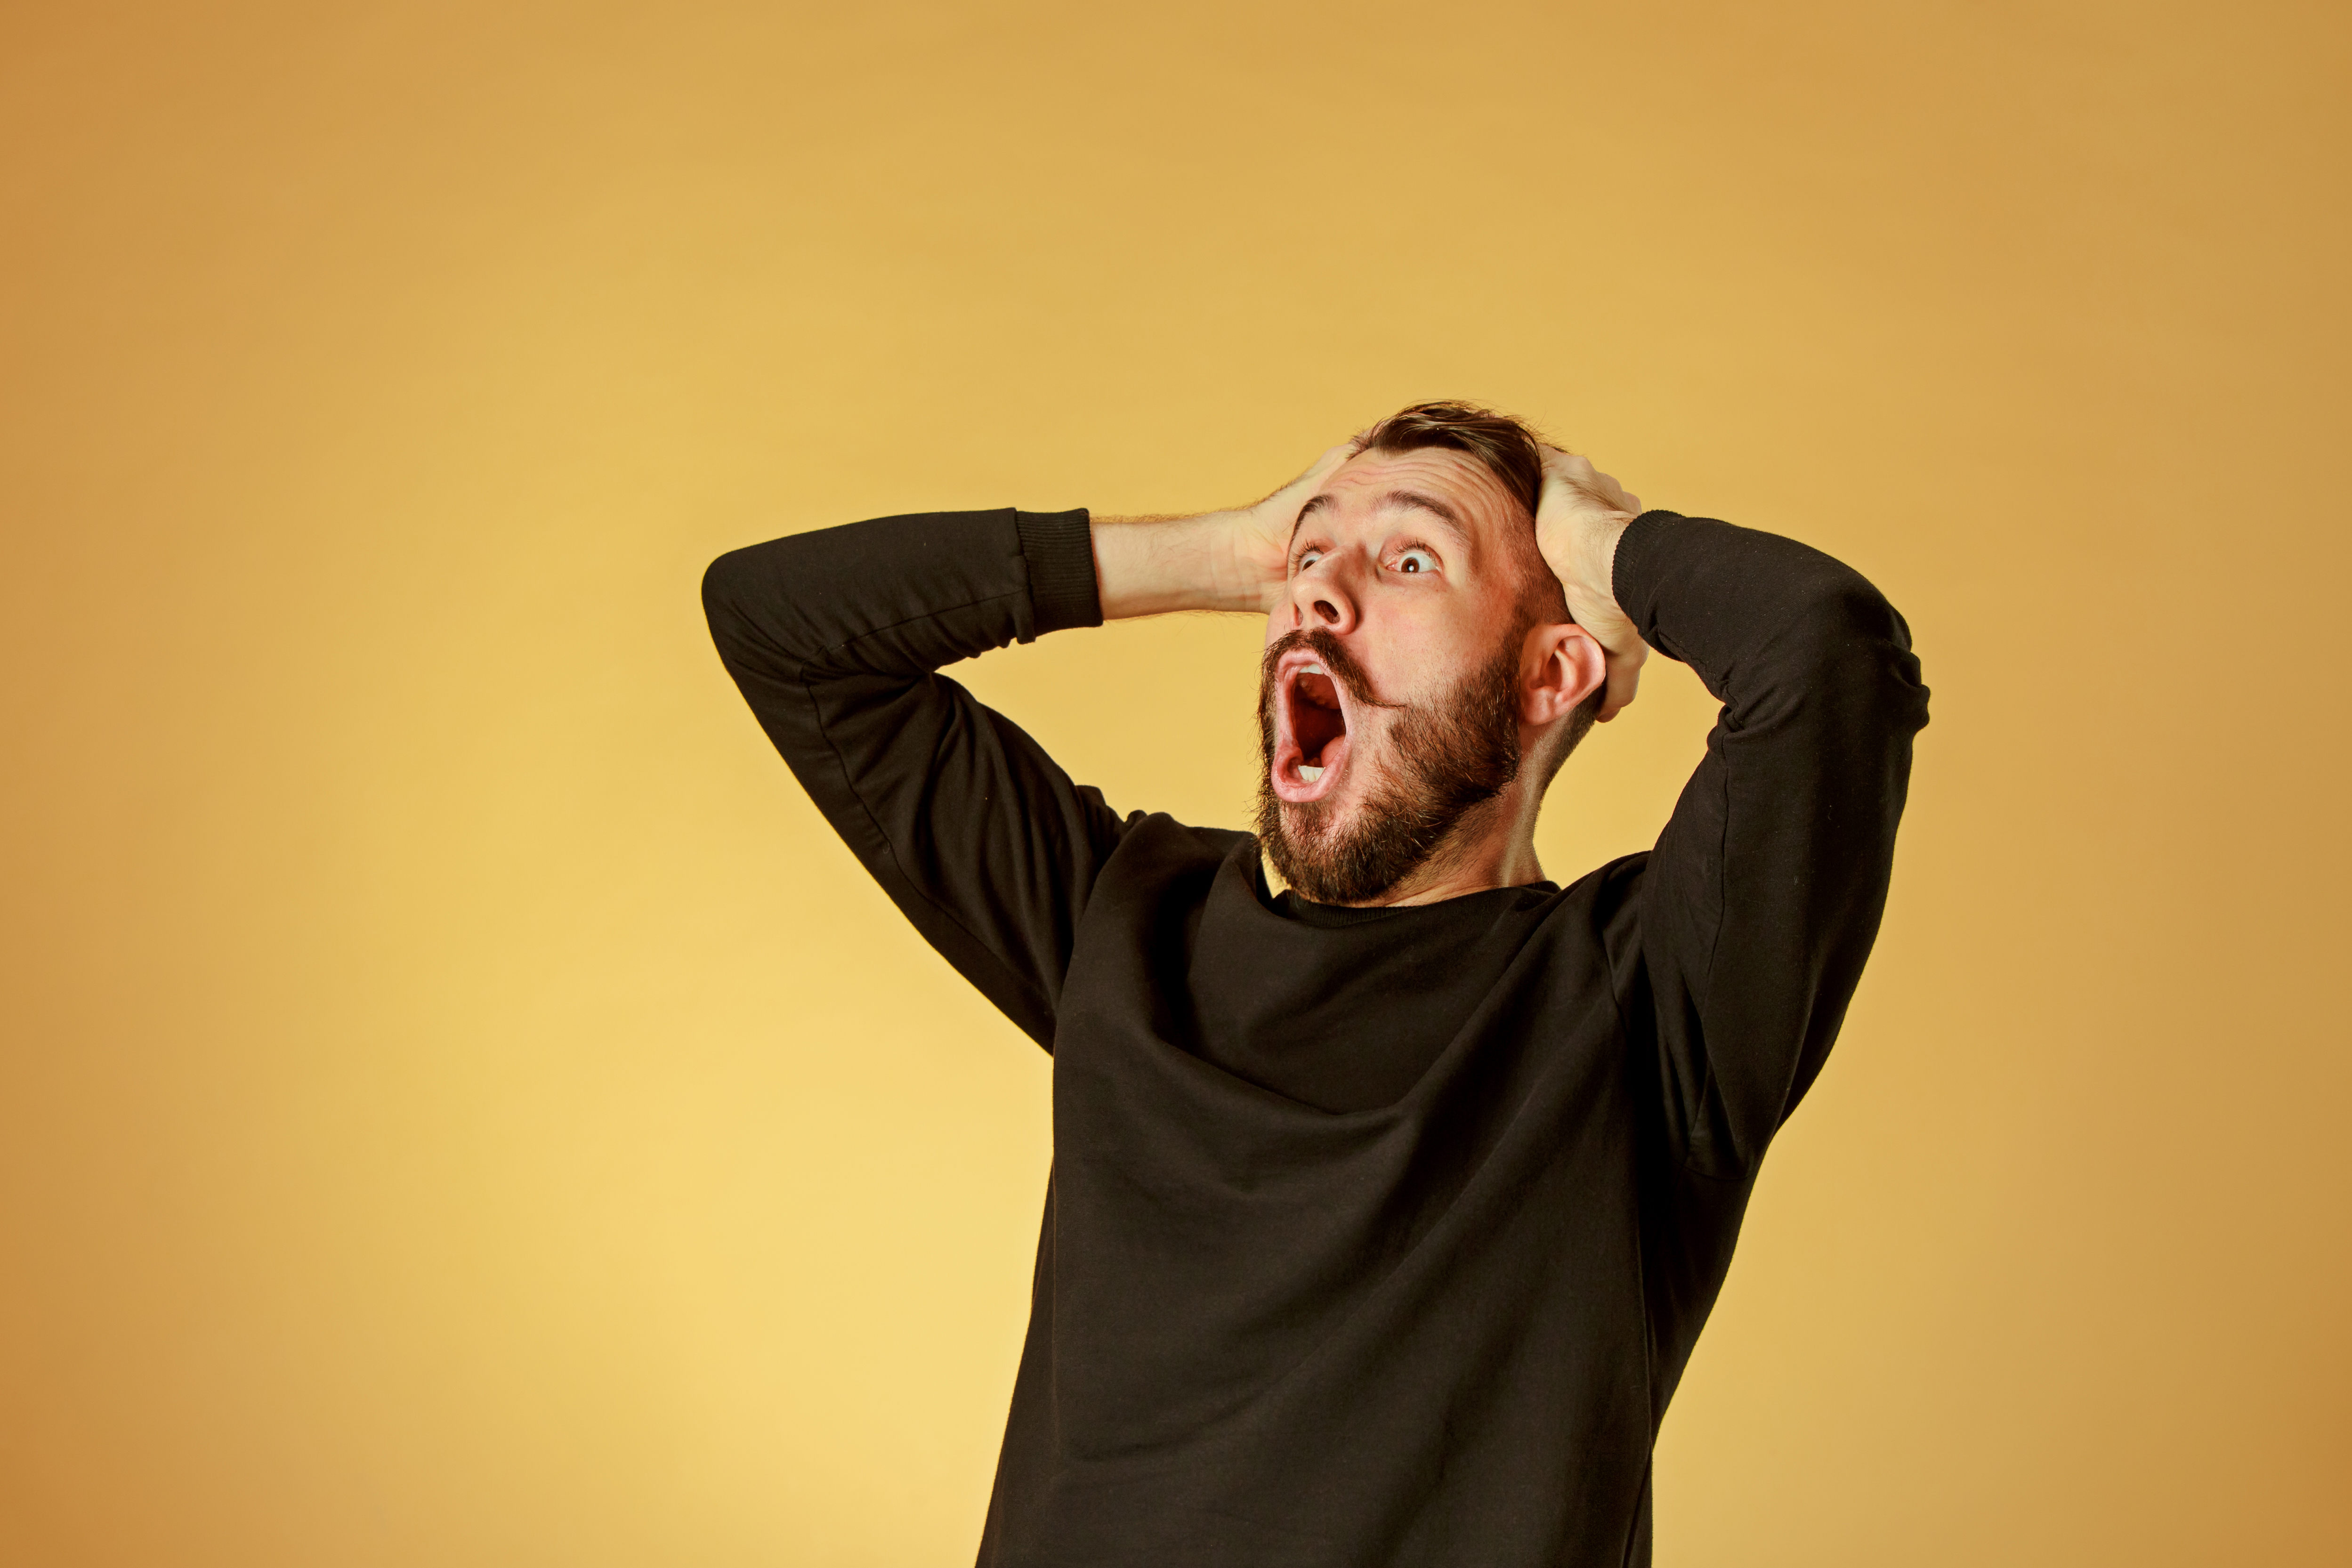 A shocked man with his hands on his head | Source: Shutterstock